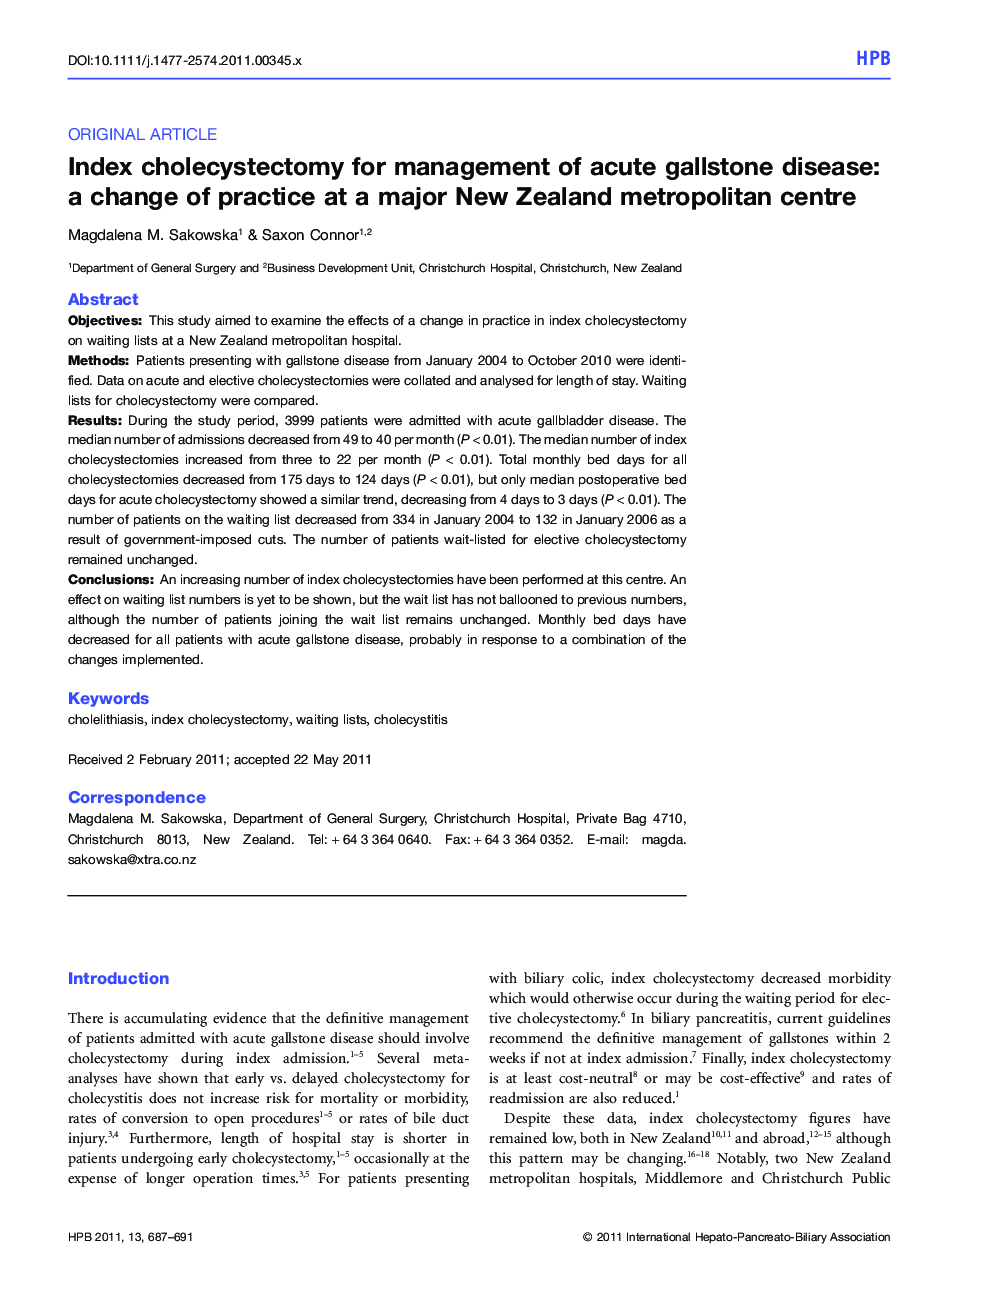 Index cholecystectomy for management of acute gallstone disease: a change of practice at a major New Zealand metropolitan centre